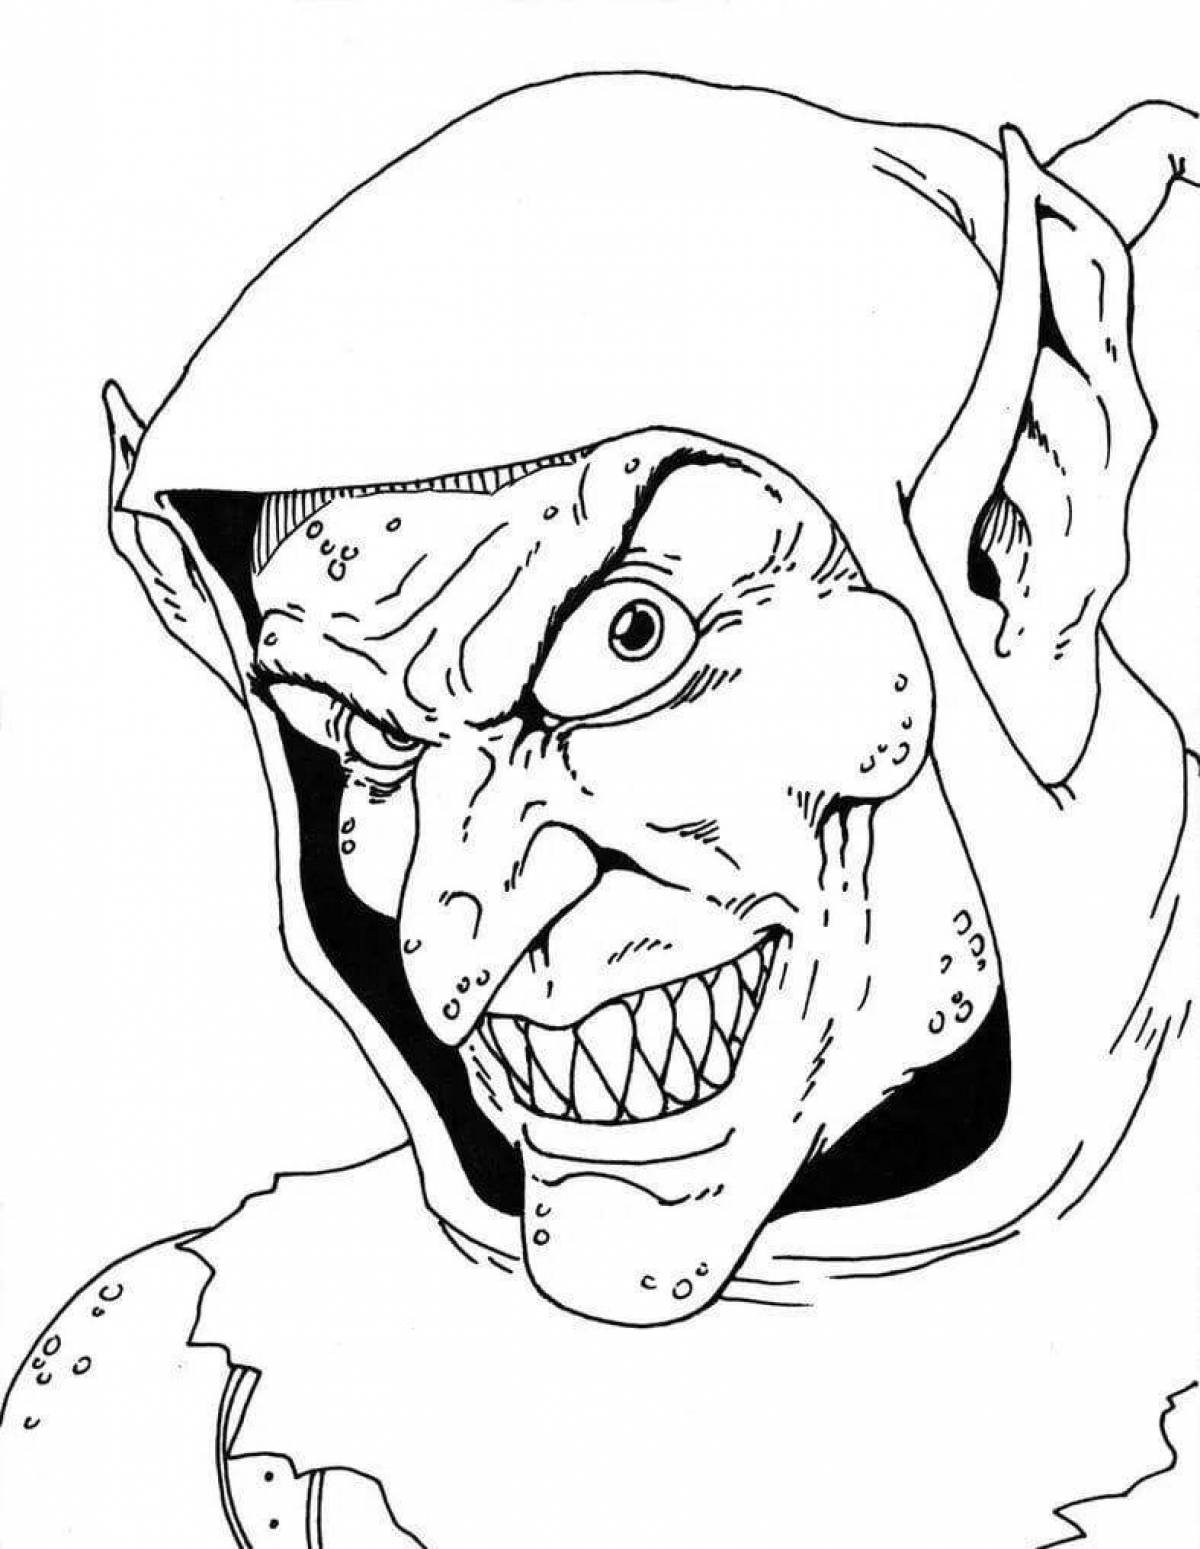 Naughty goblin coloring page